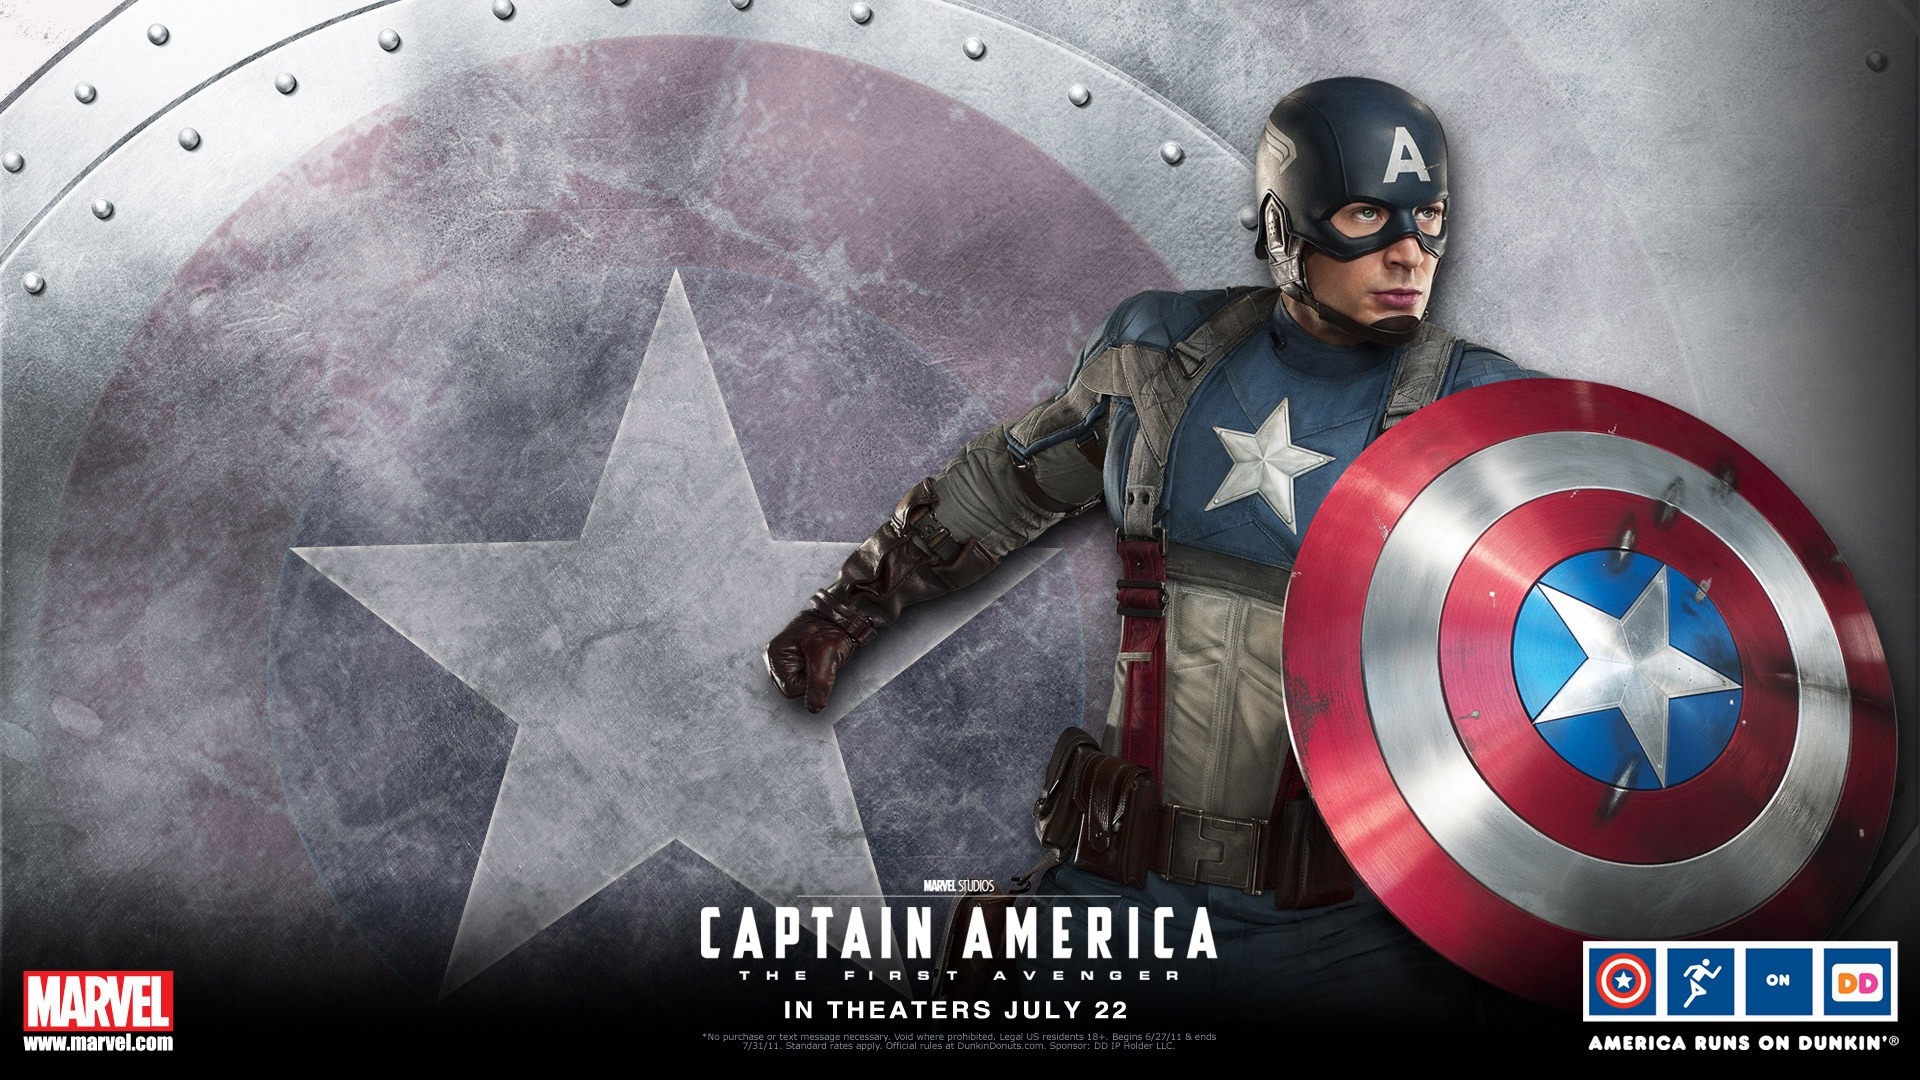 Captain America: The First Avenger wallpapers HD #6 - 1920x1080